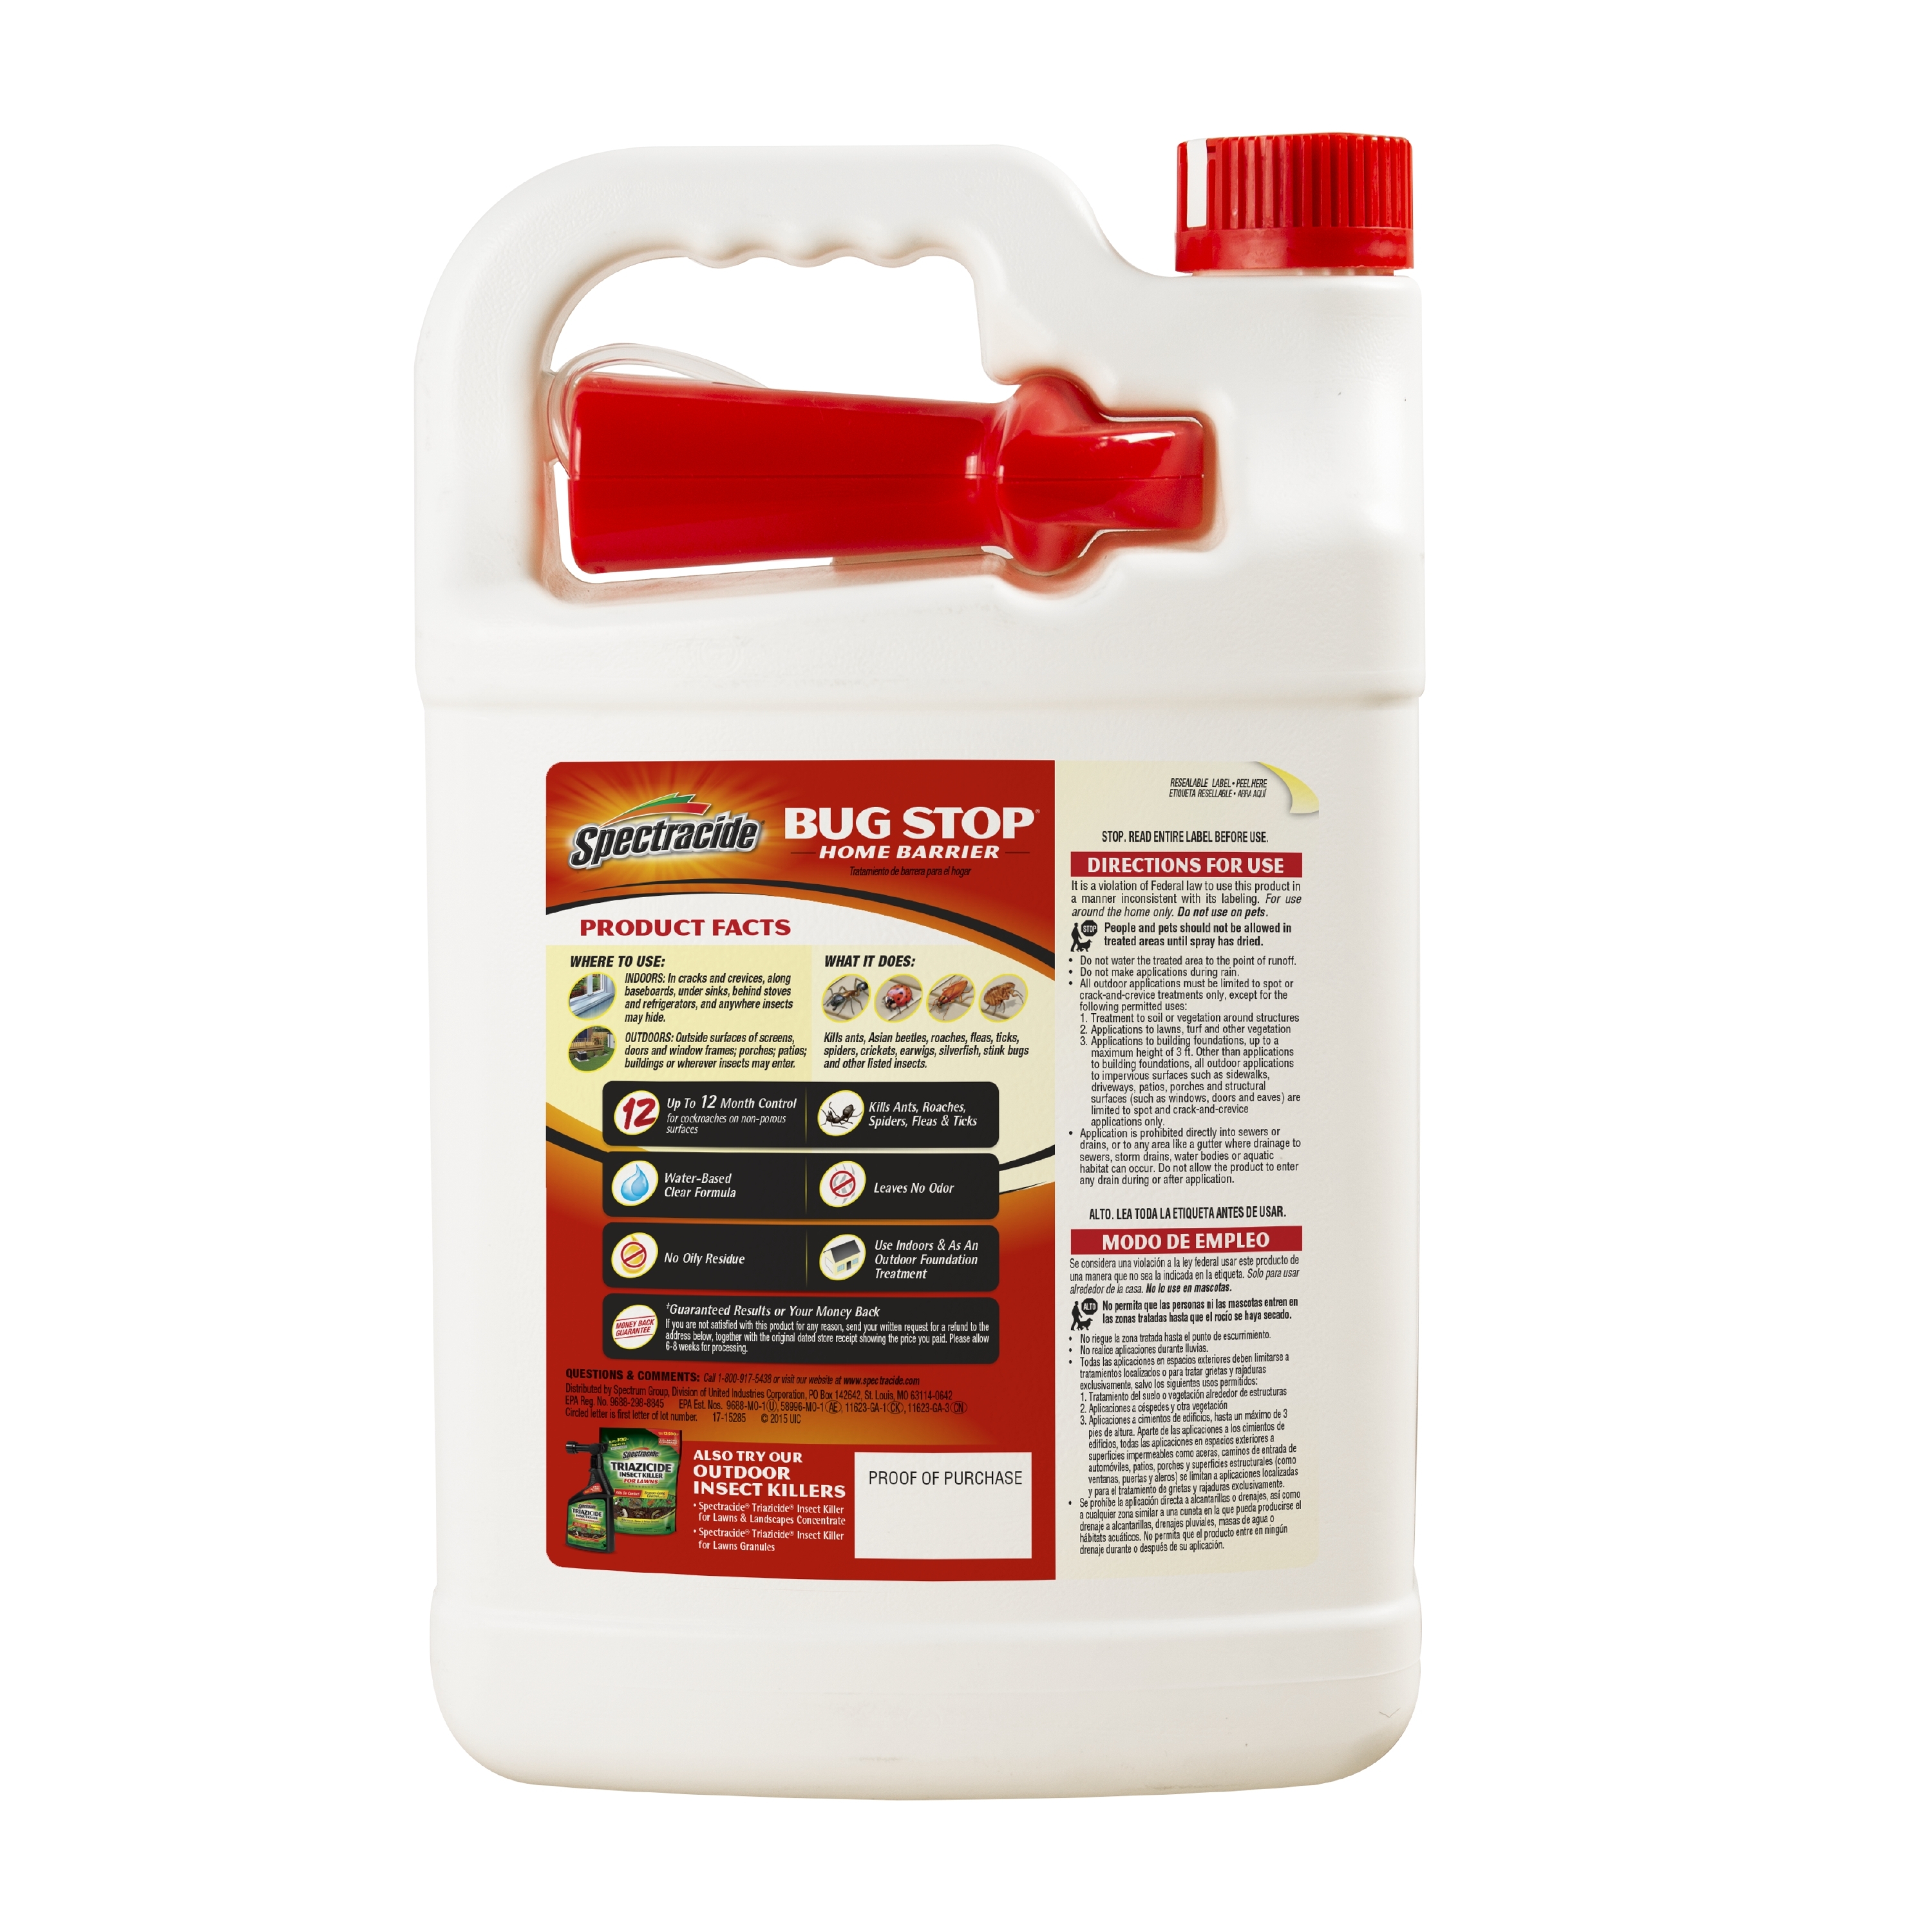 Spectracide Bug Stop Home Barrier Spray, Kills Ants, Roaches & Spiders Insect Control, 1 Gallon - image 3 of 11